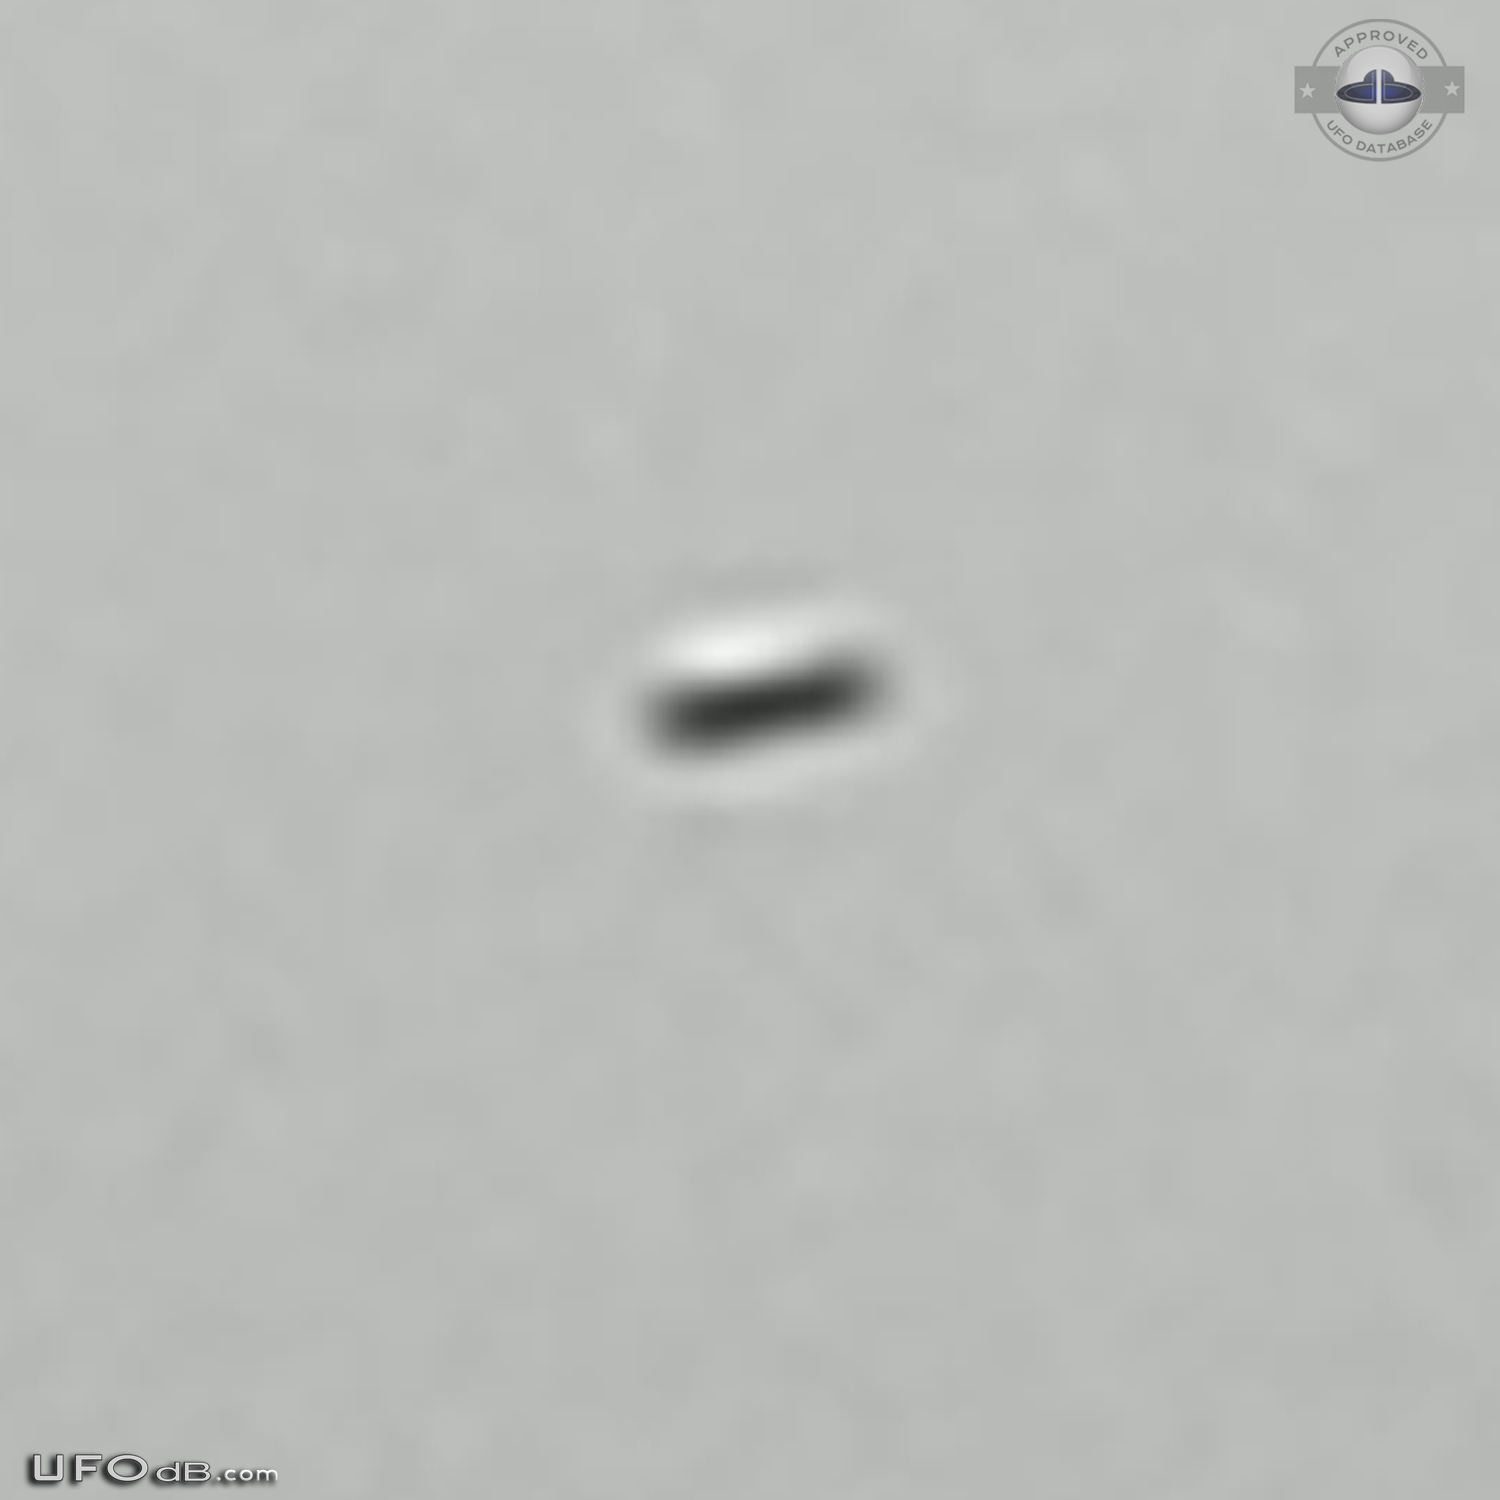 3 disc shaped UFOs seen over Siracusa Sicily Italy january 2014 UFO Picture #599-3